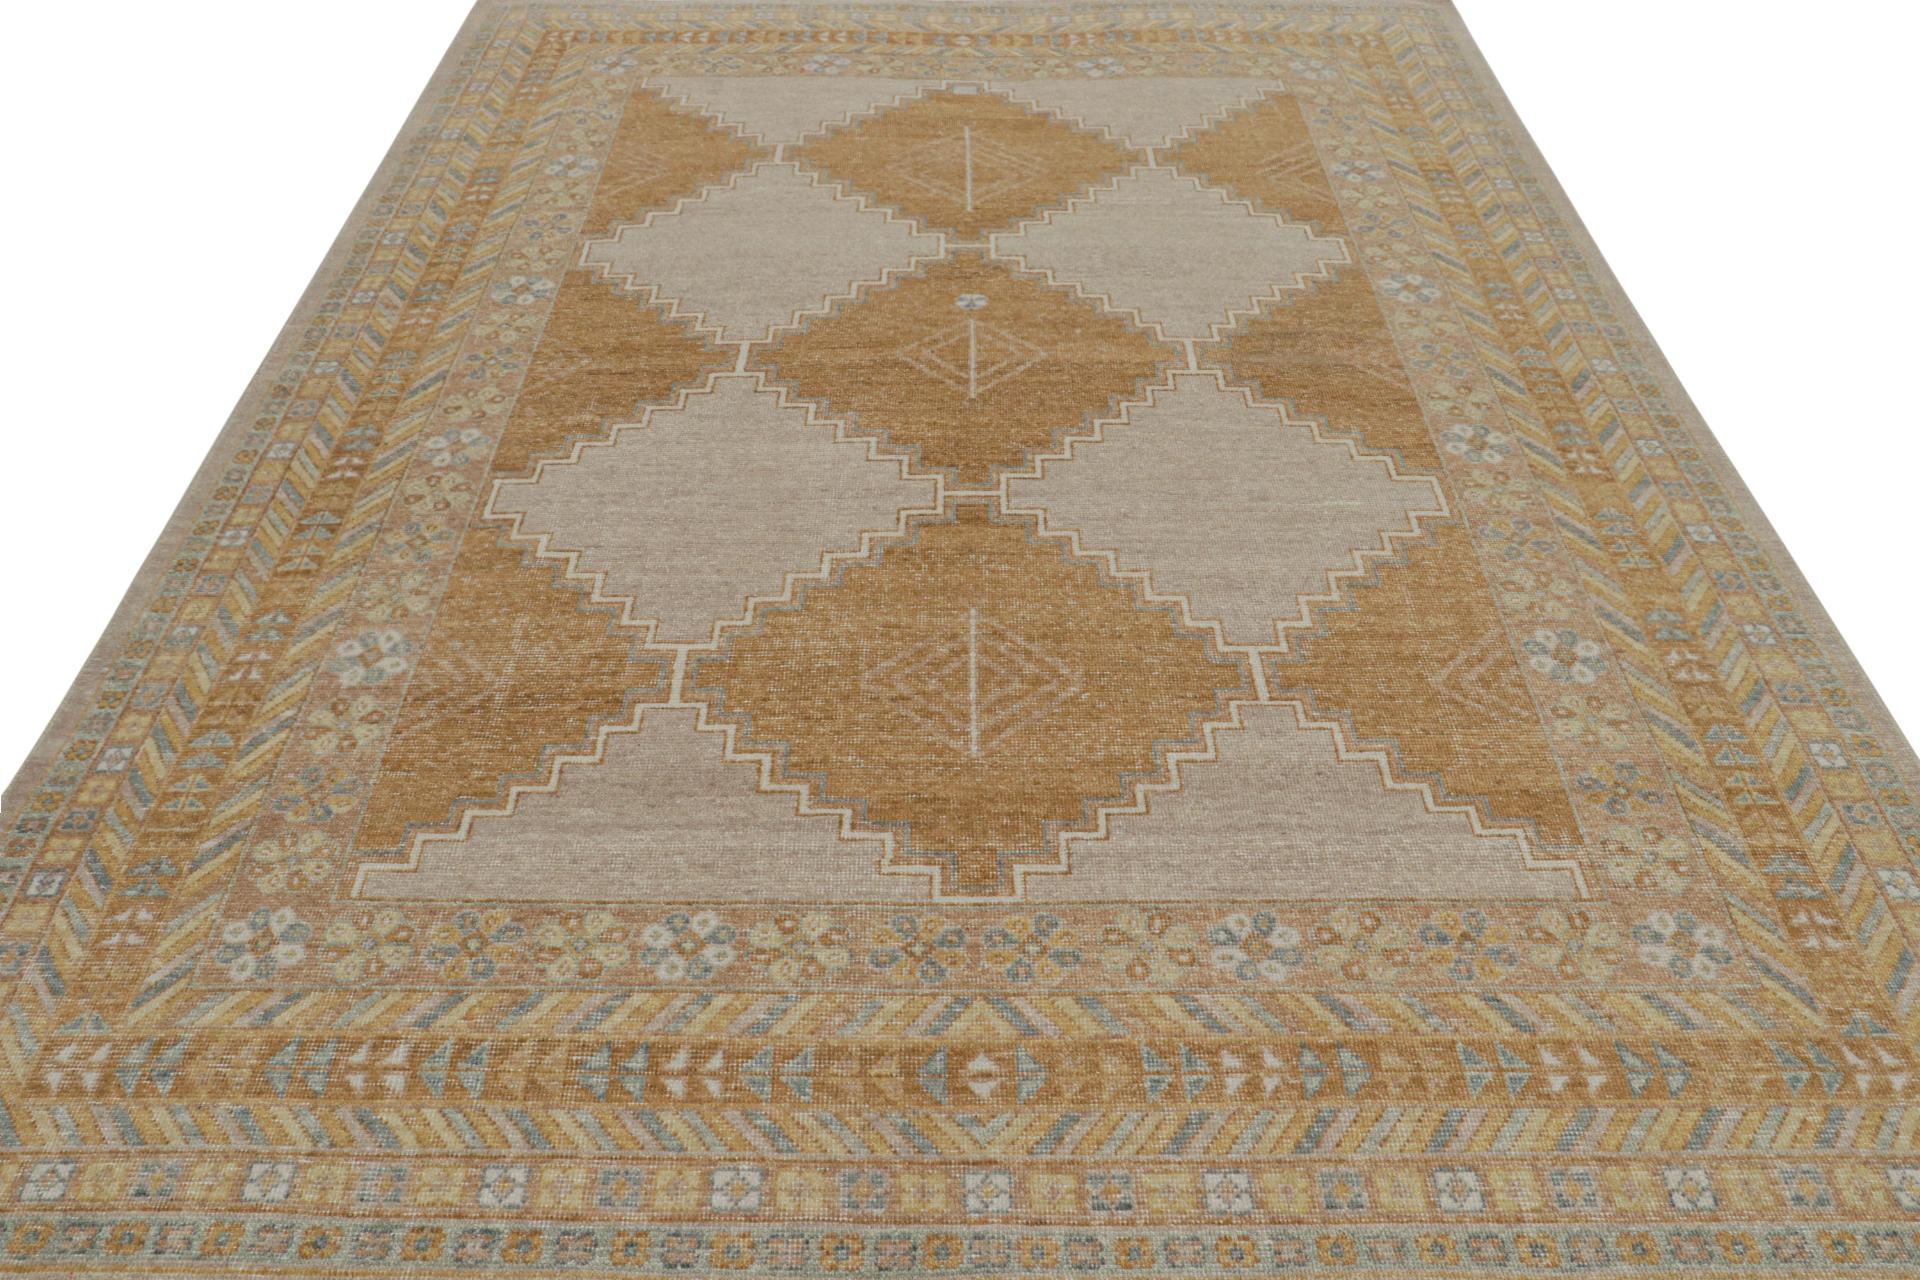 Modern Rug & Kilim’s Distressed Tribal Rug In Beige, Brown and Gold Patterns For Sale